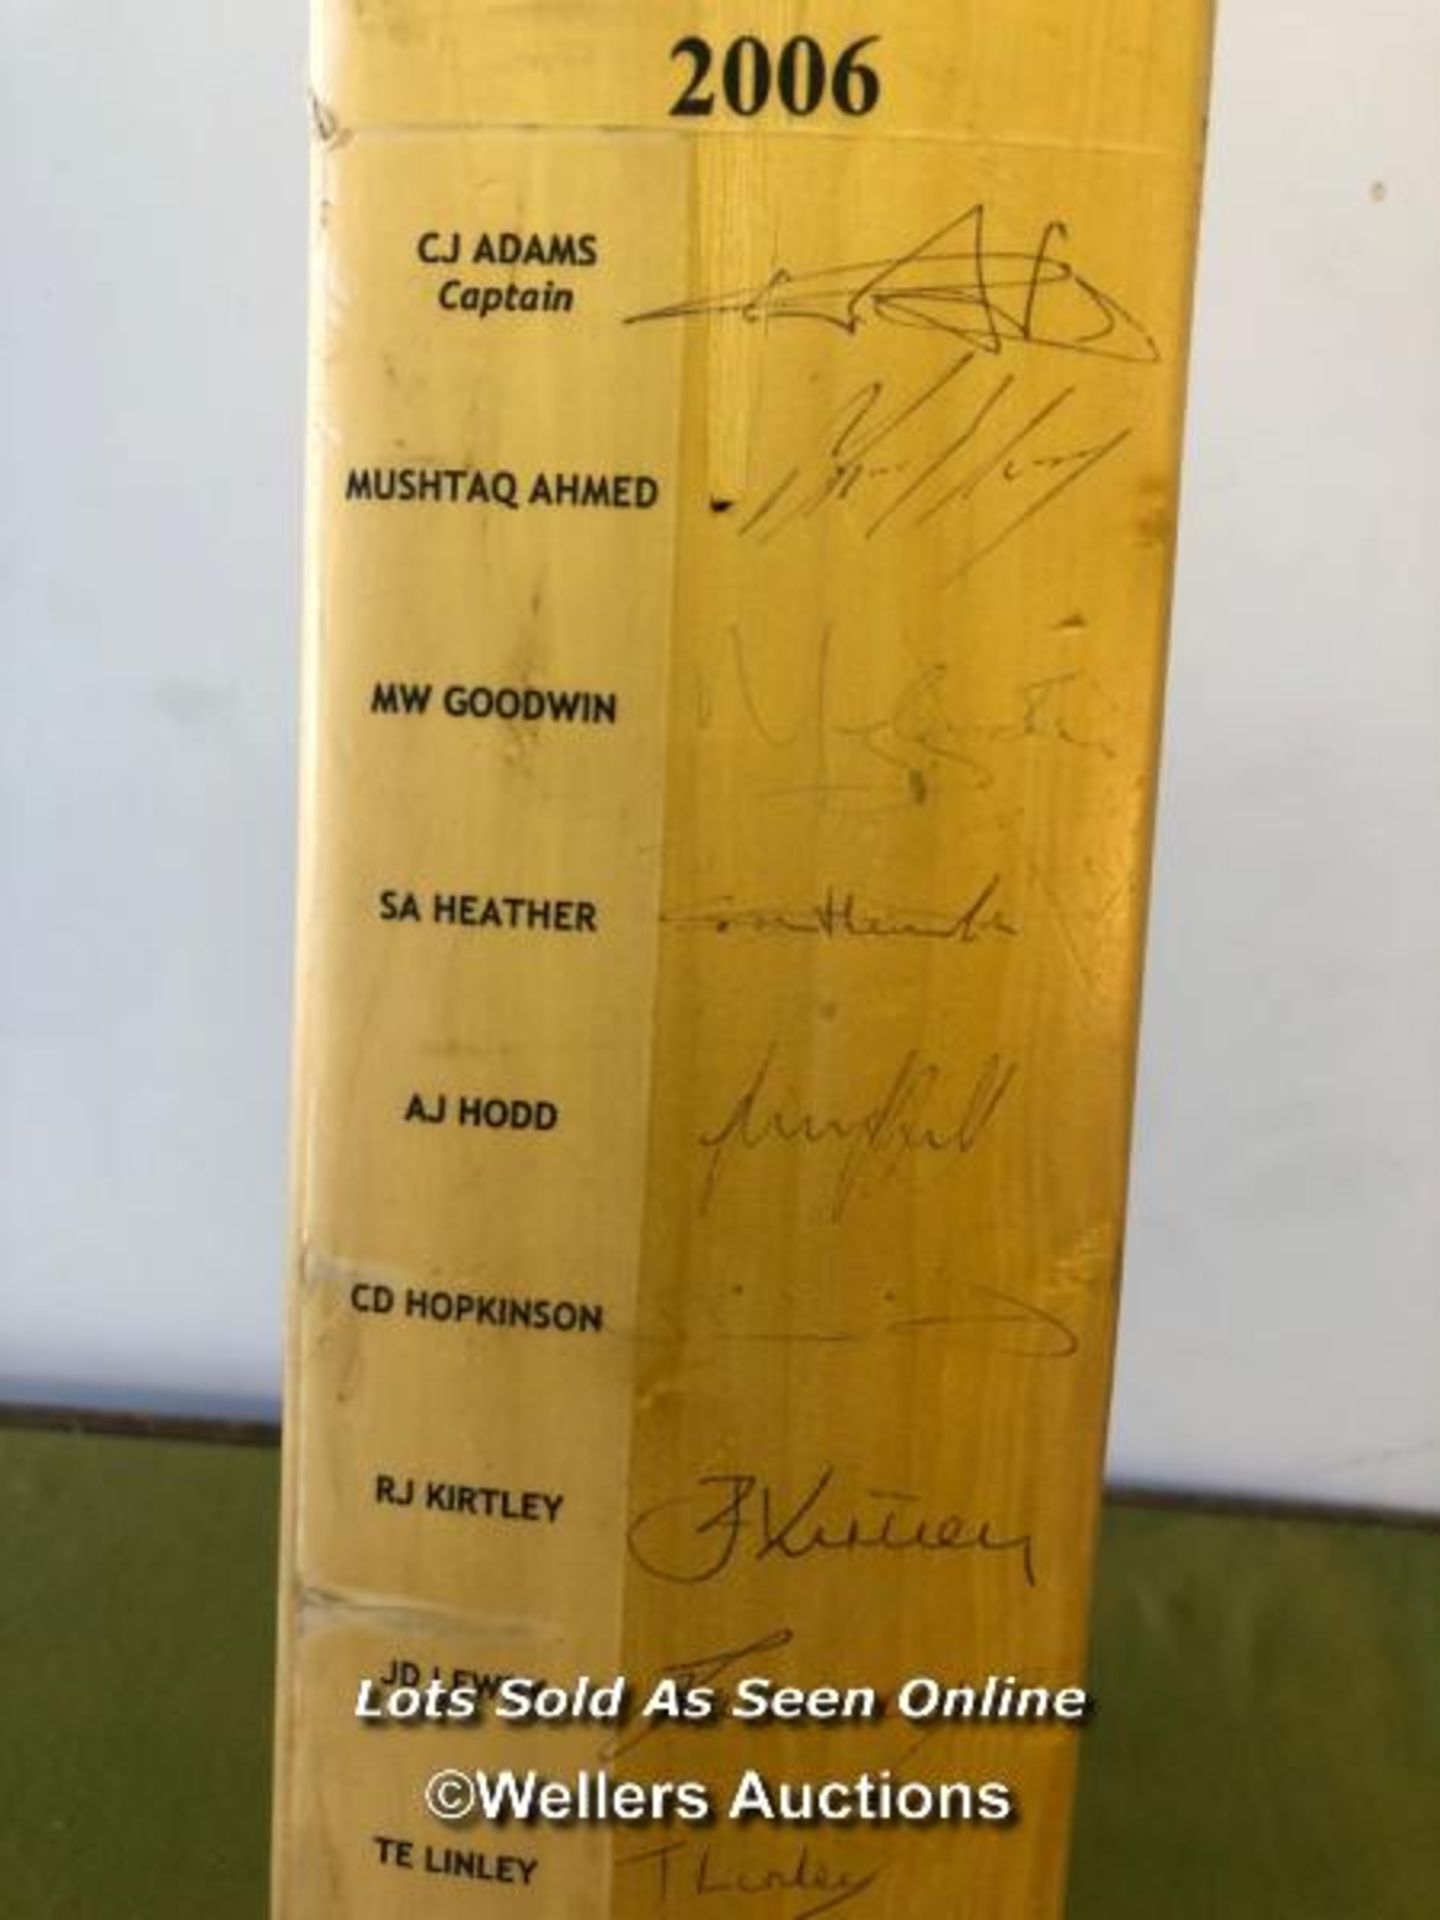 CRICKET BAT SIGNED BY THE SUSSEX CCC 2006, INCLUDING MATT PRIOR'S SIGNATURE - Image 2 of 4